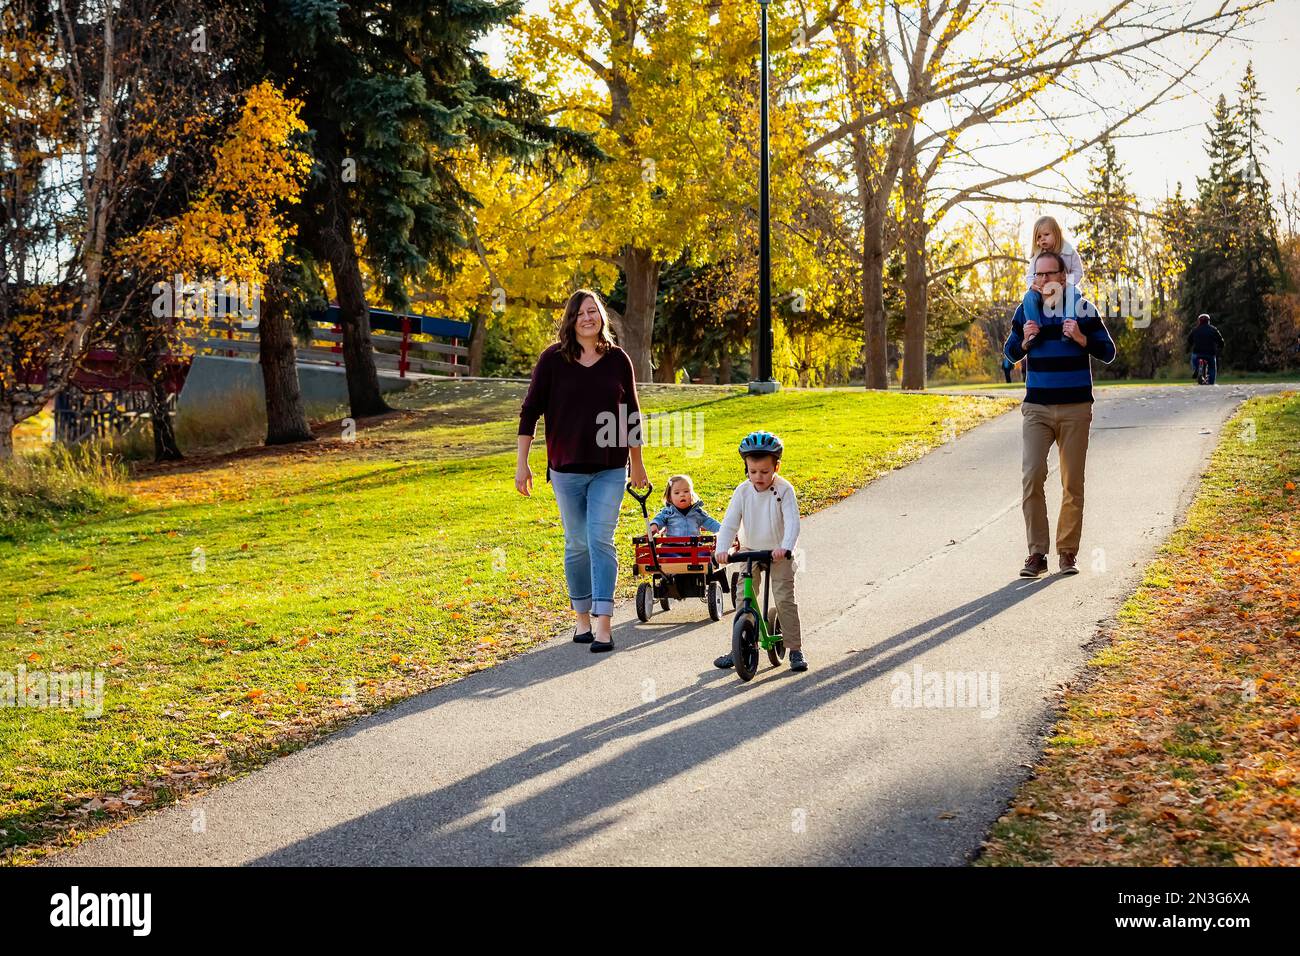 A mother pulling her daughter with Down Syndrome in a wagon, the father has their daughter on his shoulders and their son is riding his bike in a c... Stock Photo